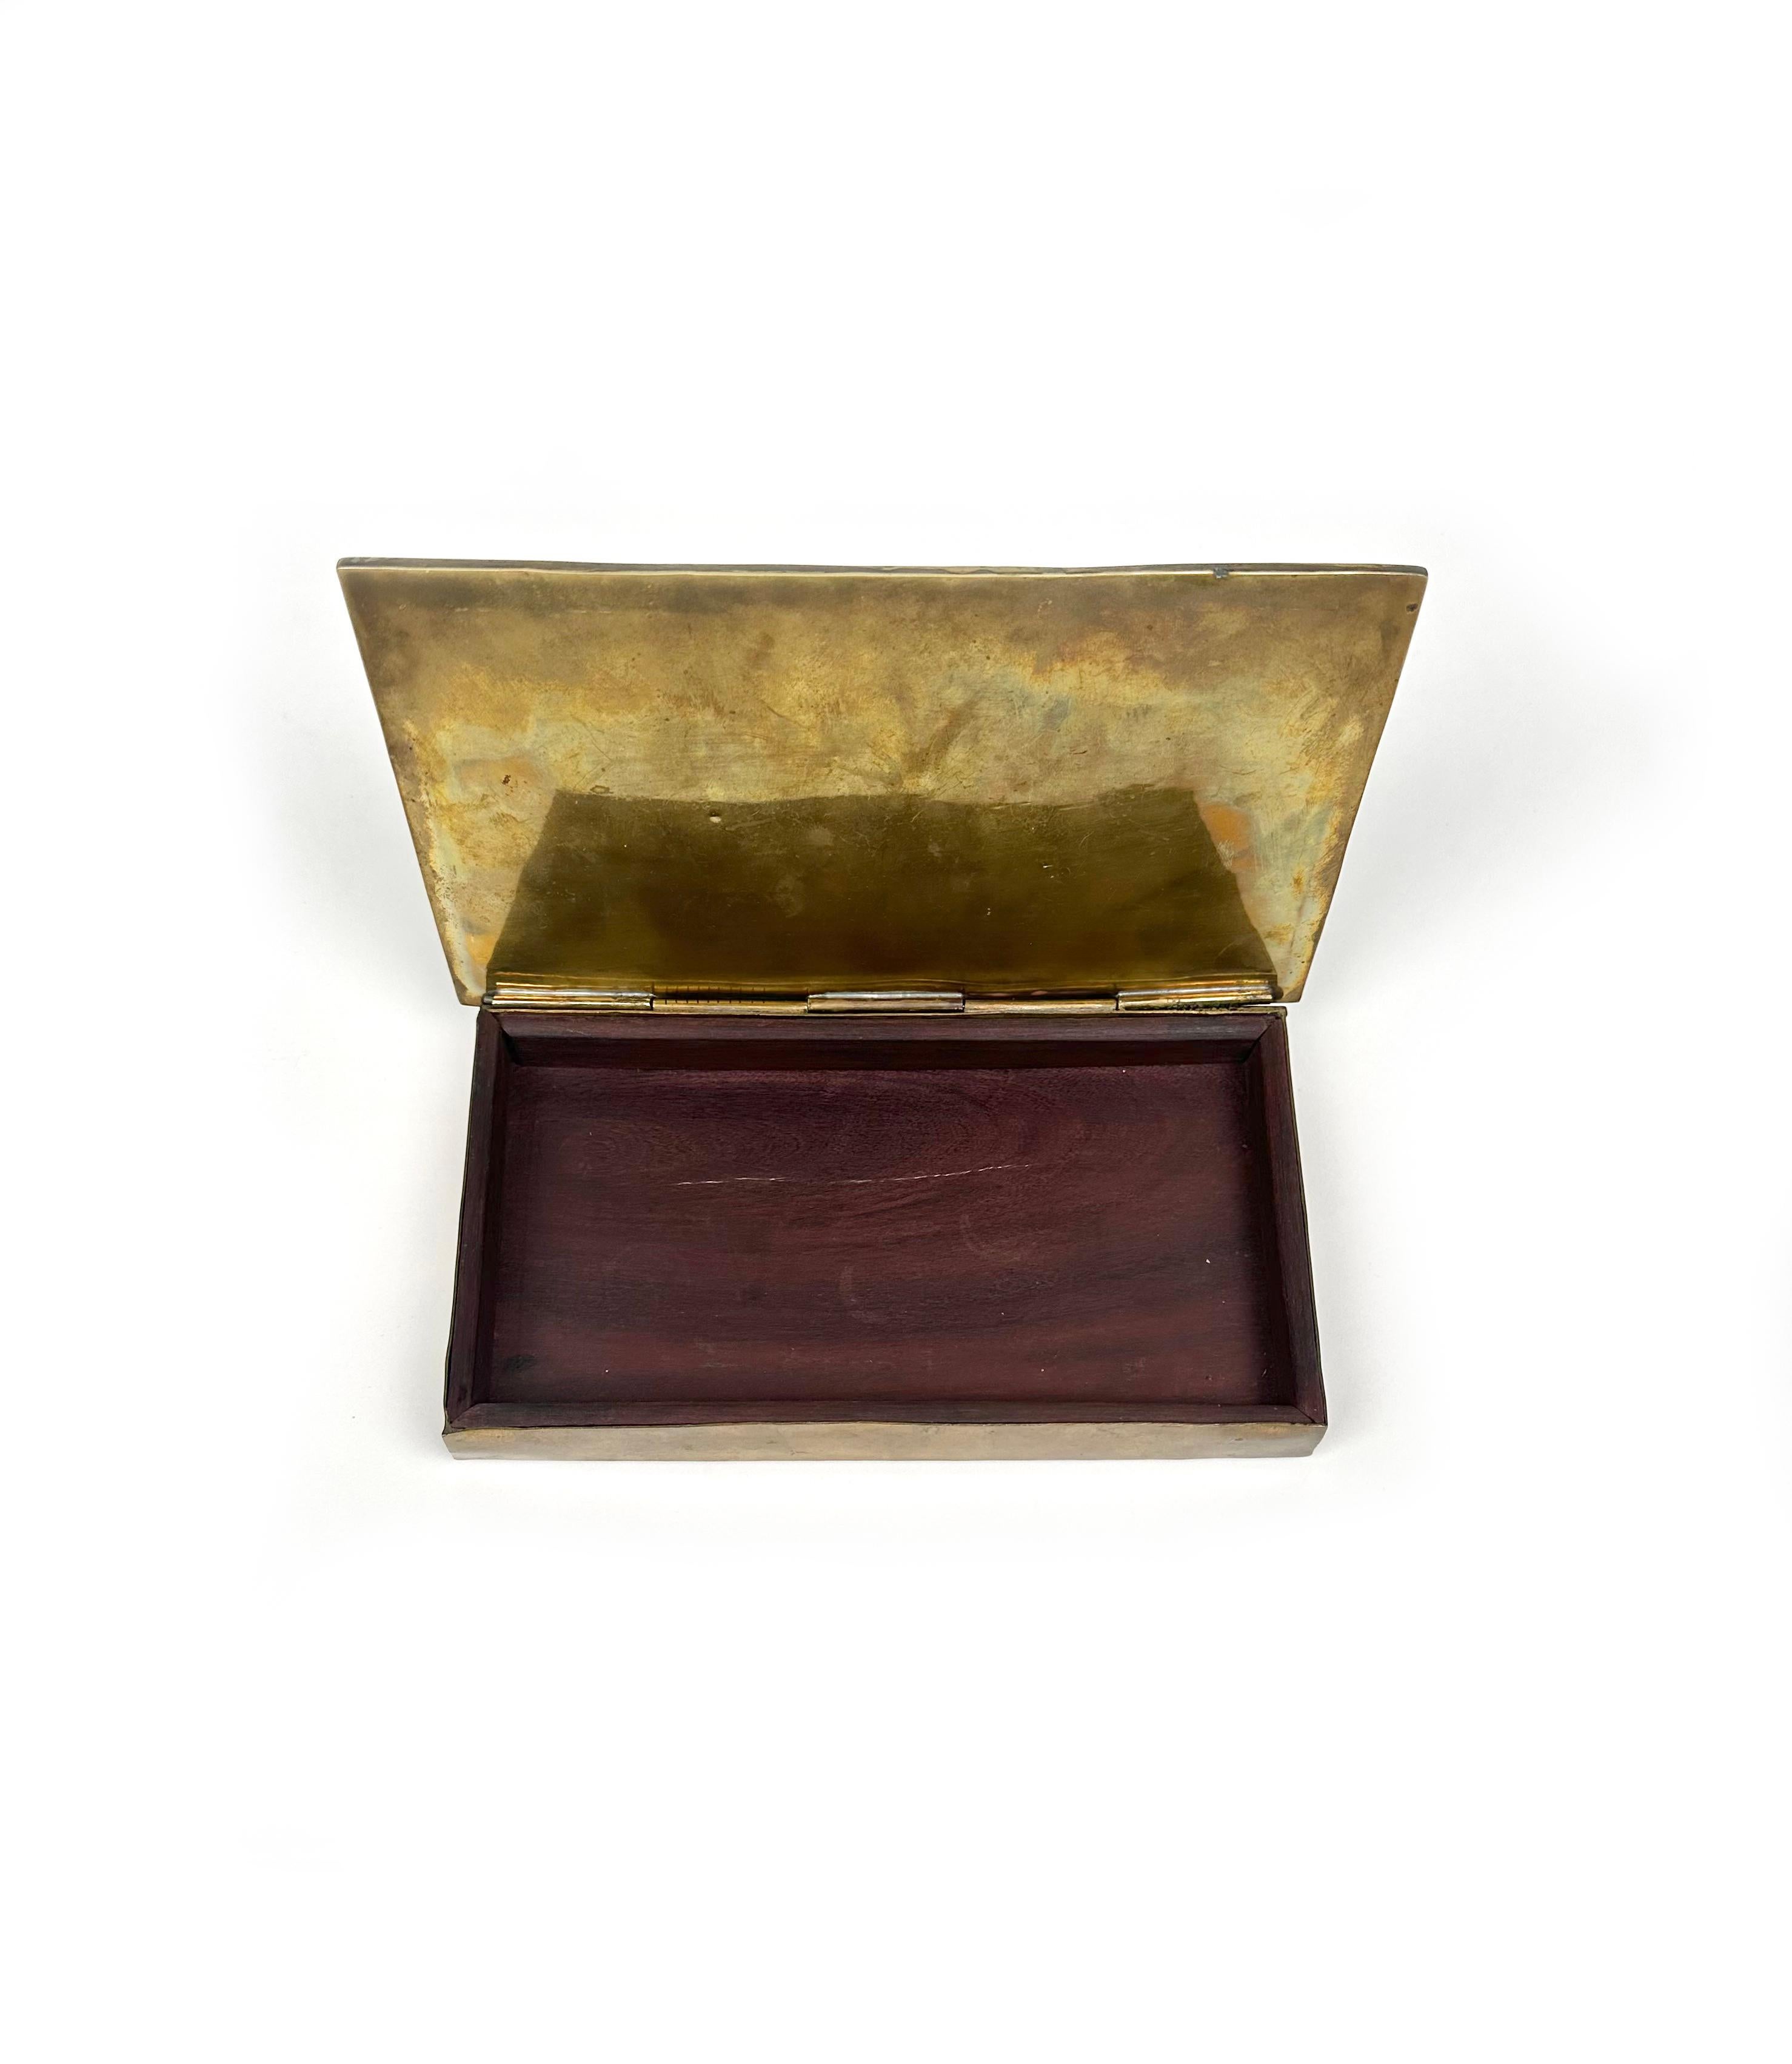 Decorative Cigar Box in Brass, Malachite and Wood, Mexico, 1960s For Sale 3